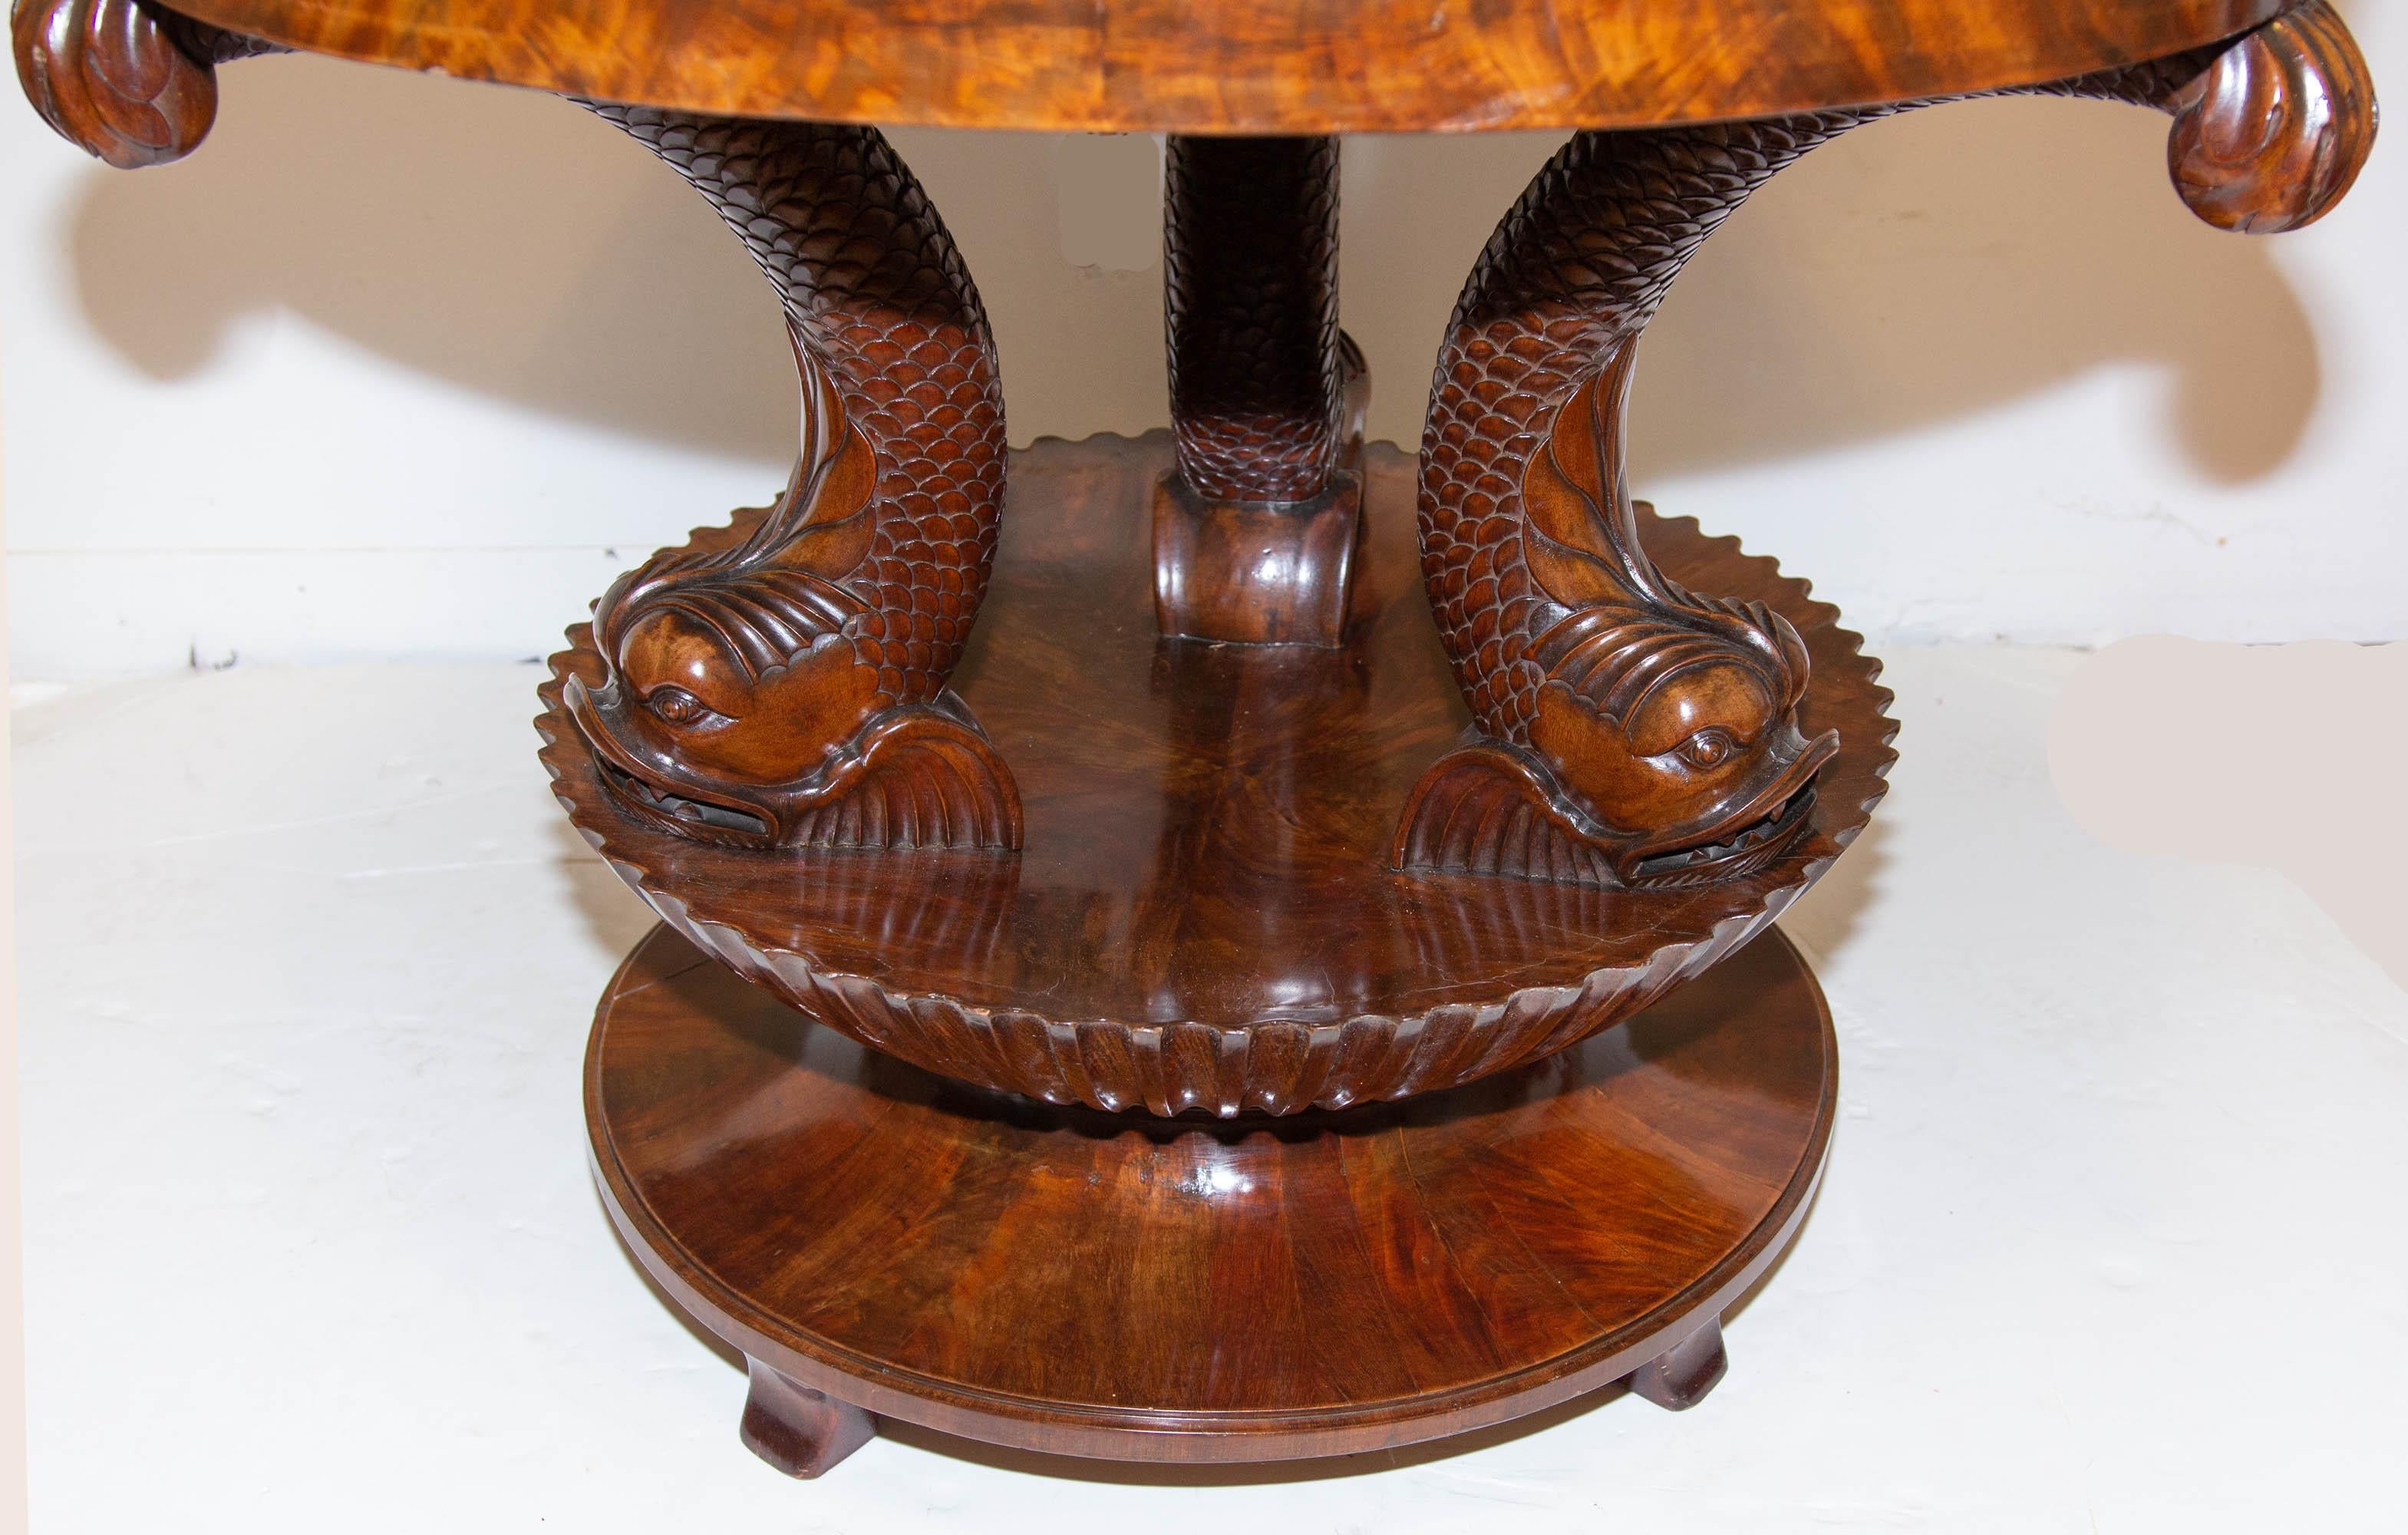 Antique Italian Neoclassical Sgagliola Table with Carved Dolphin Base circa 1810 For Sale 1